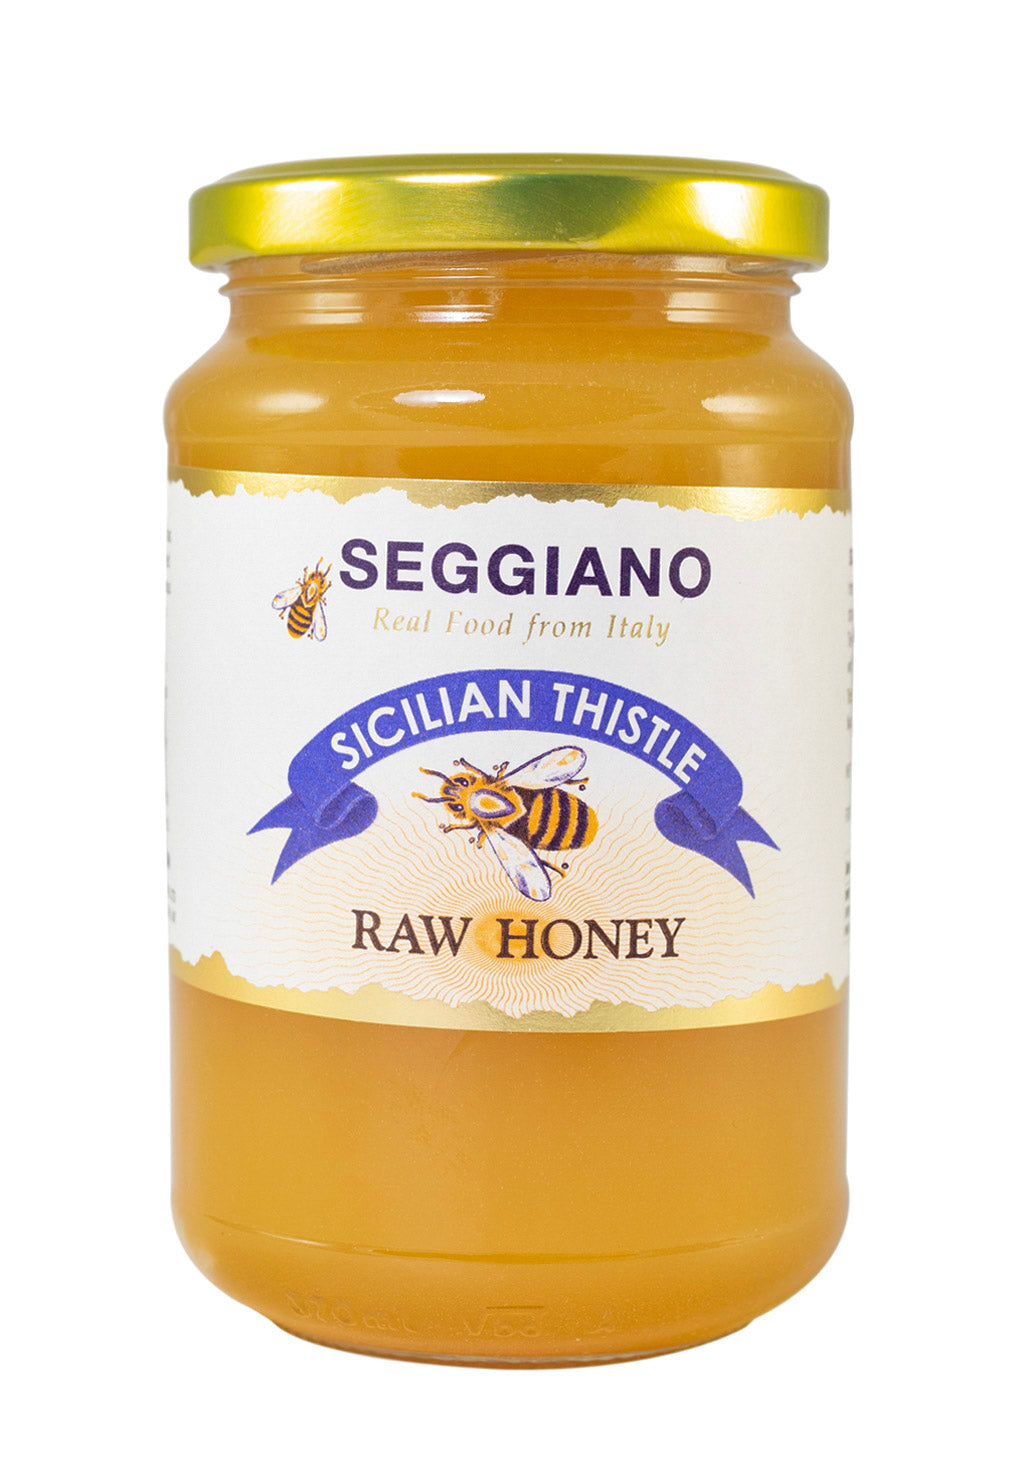 Sicilian Thistle Raw Honey | Seggiano | Raw Living UK | Raw Foods | Seggiano&#39;s Raw Unpasteurised Sicilian Sulla Honey is made with Wild Thistle Flowers, yielding a pleasantly intense flavour; floral with a Sweet Caramel finish.